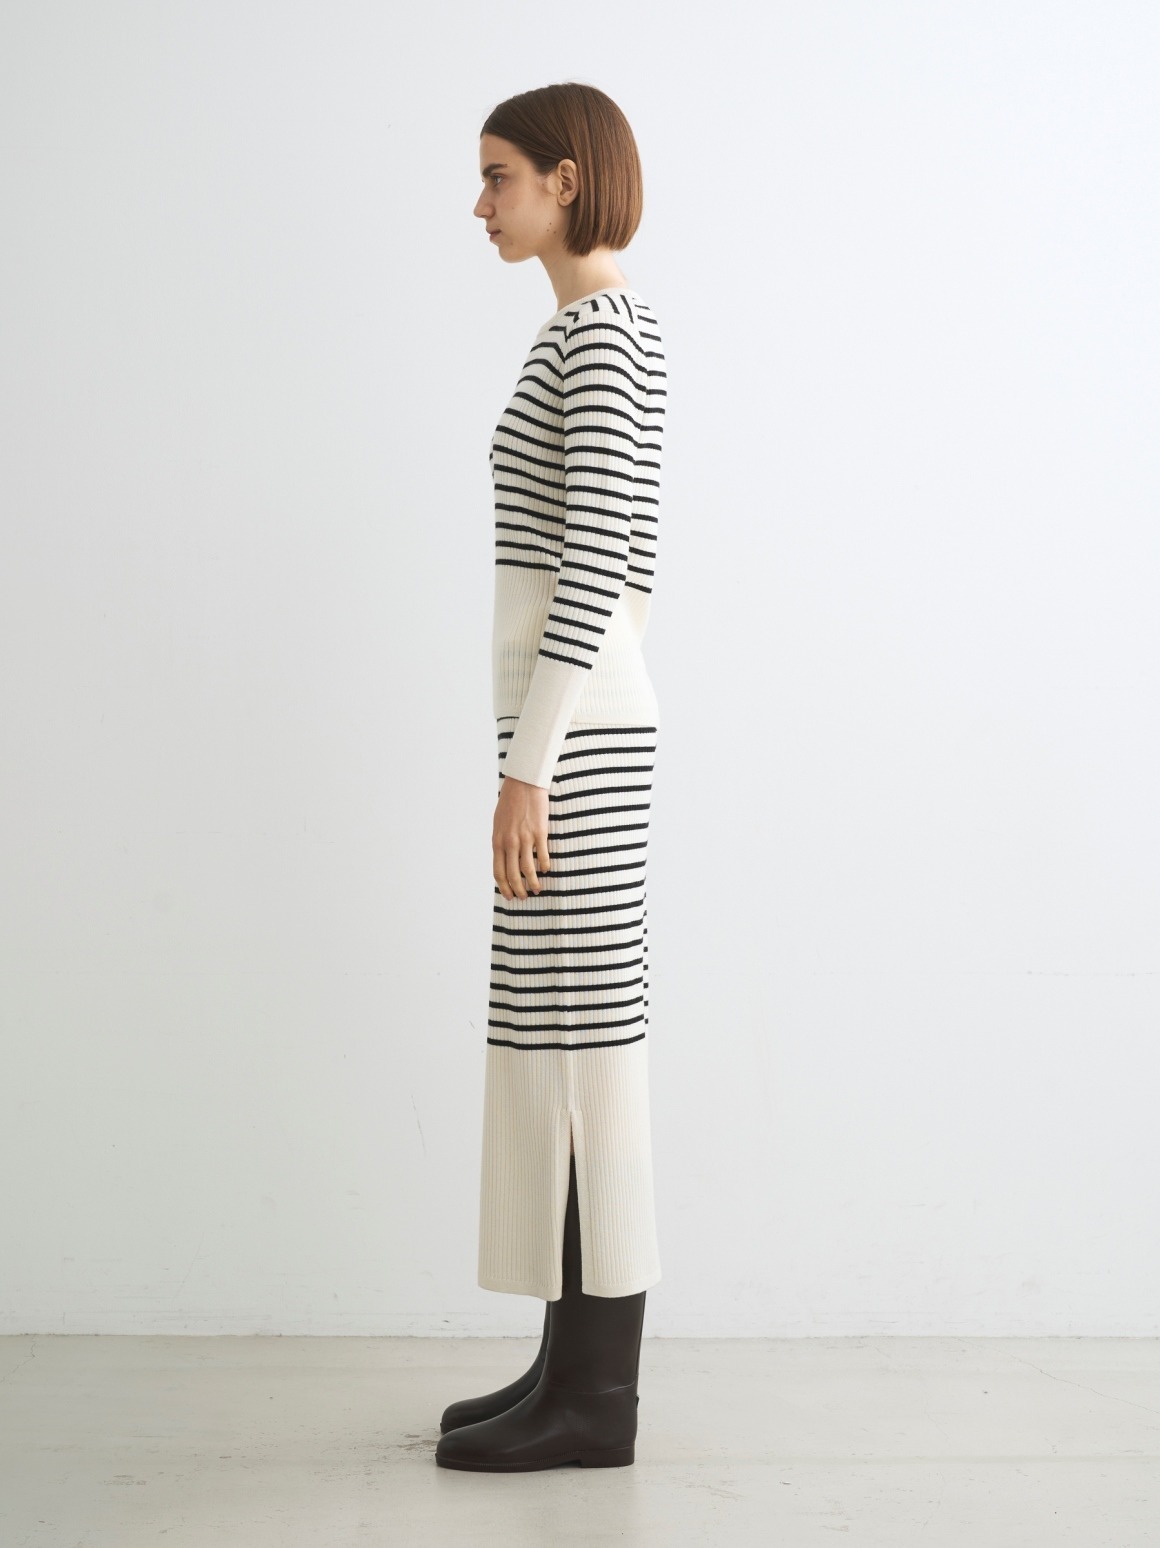 Wool outfit rib tee knit 詳細画像 off white/black 12